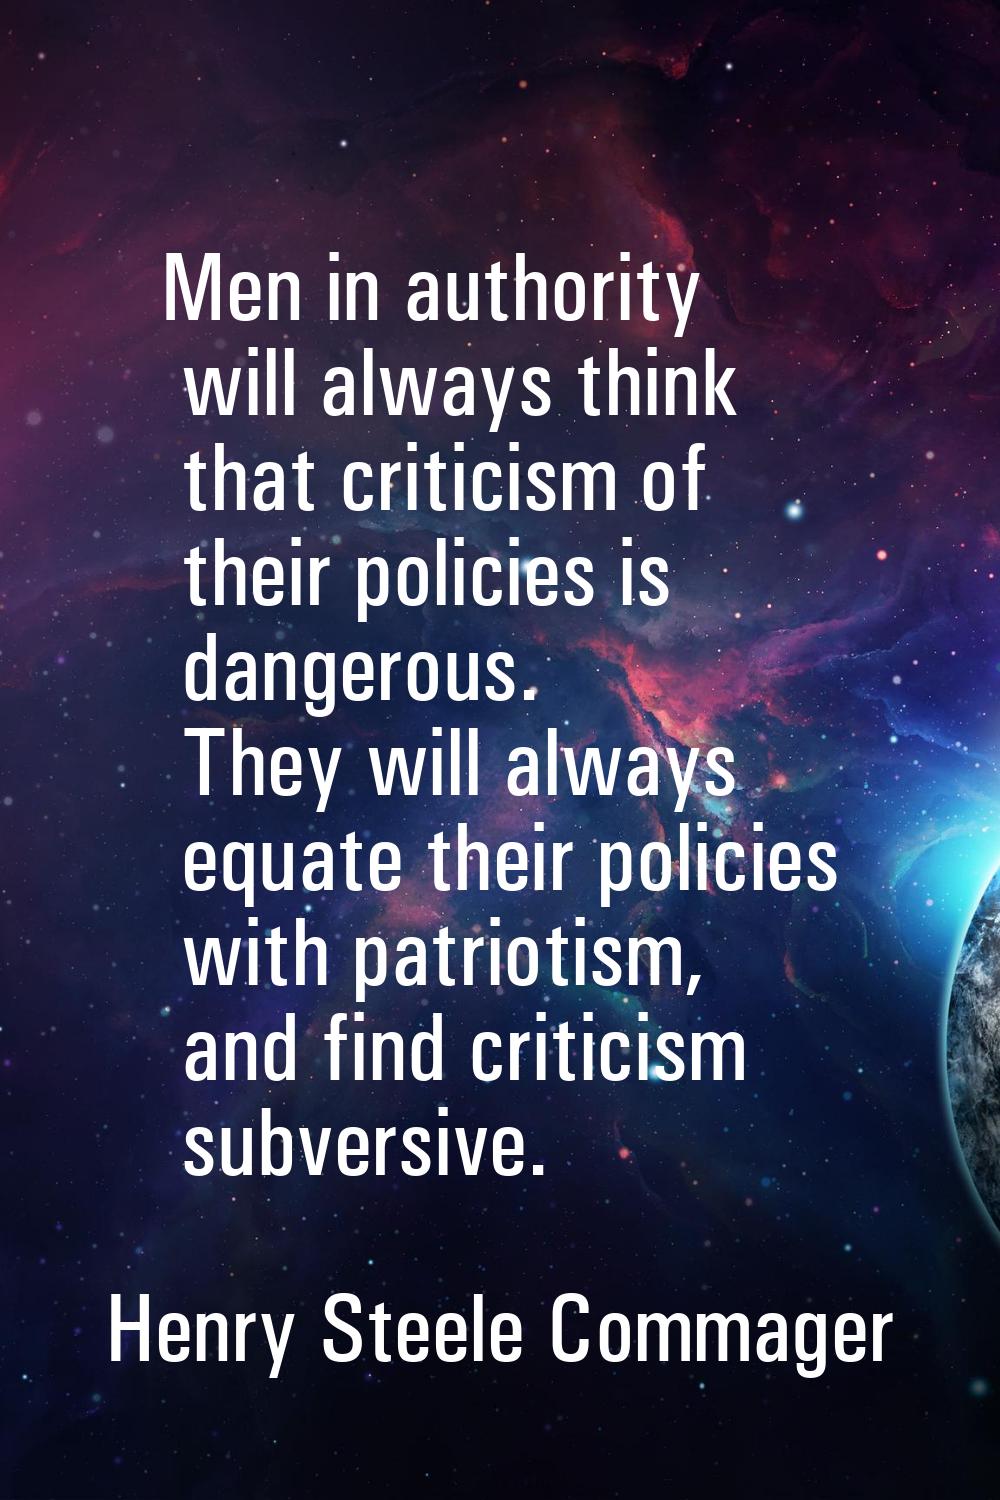 Men in authority will always think that criticism of their policies is dangerous. They will always 